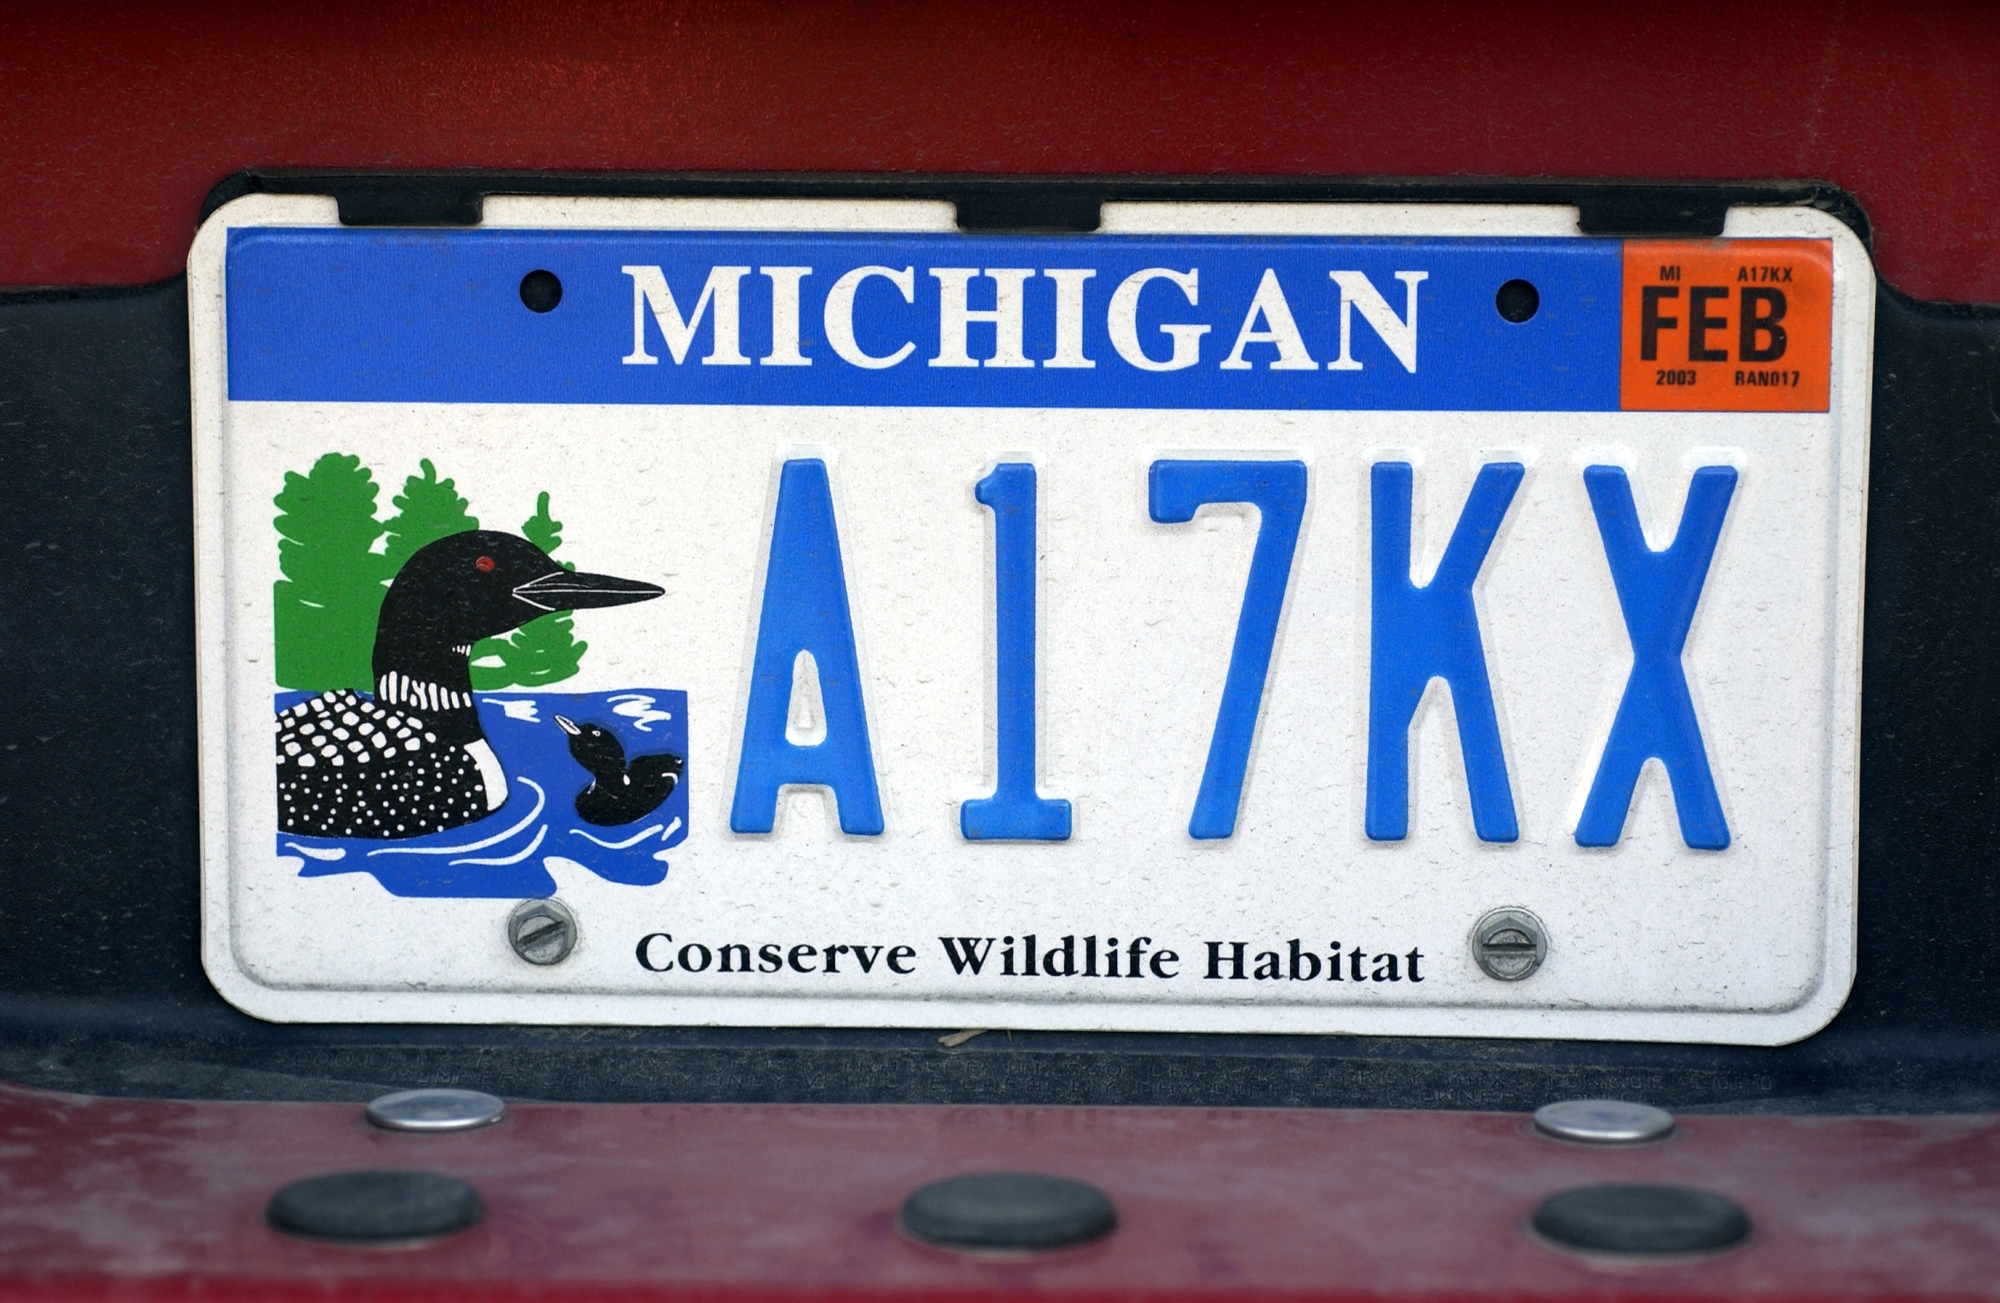 The sale of the wildlife habitat specialty license plate supports critical projects to conserve Michigan’s nongame wildlife species.